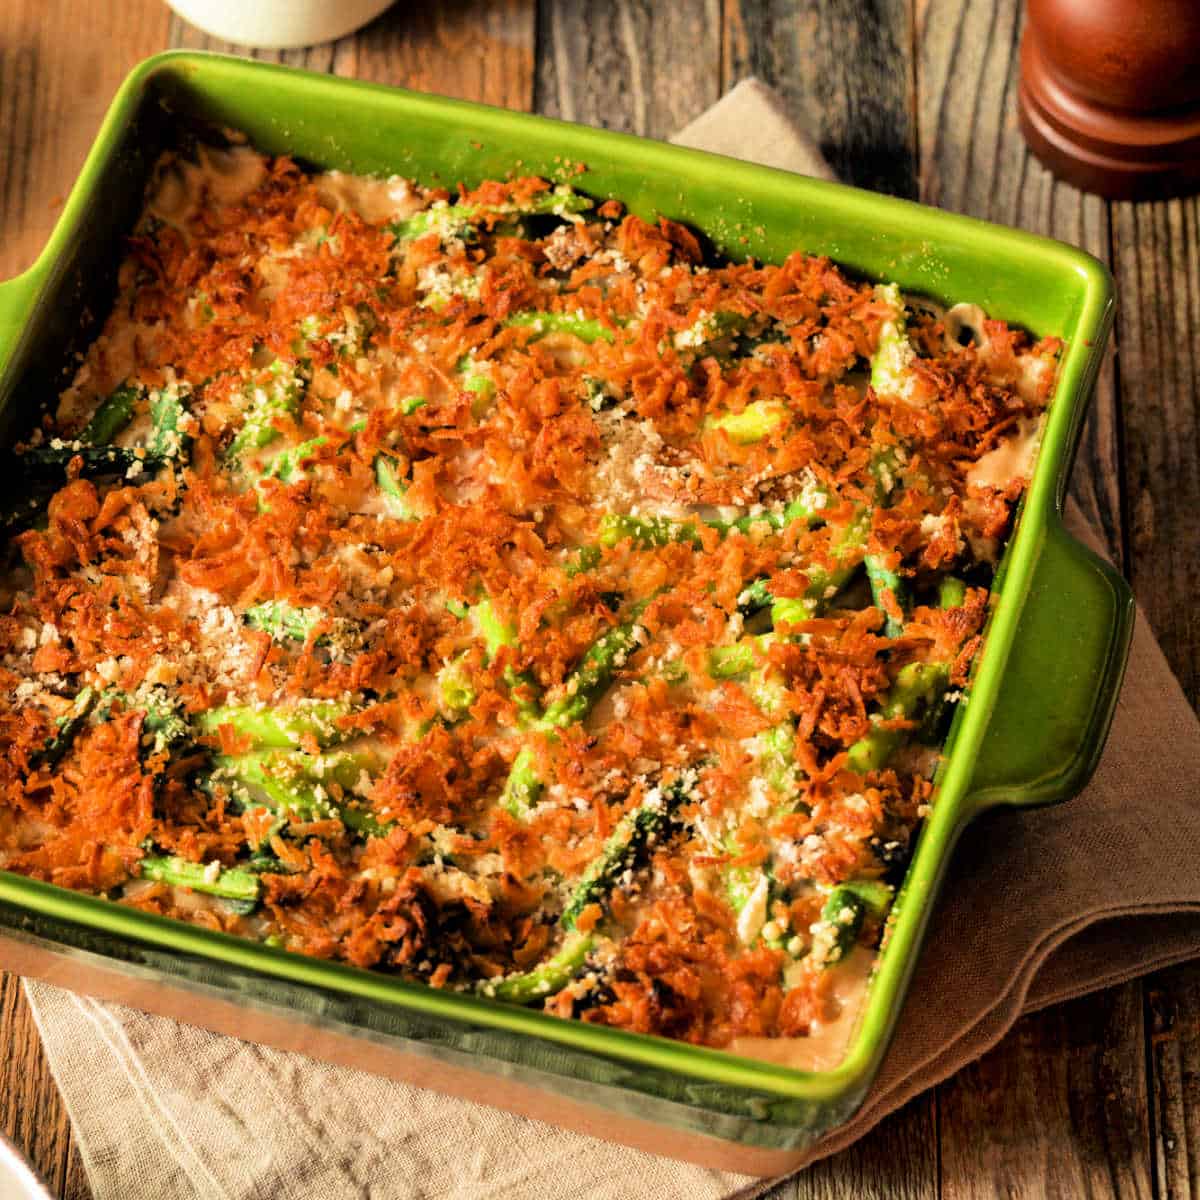 Fiddlehead Casserole in an olive green baking dish sitting on a wooden table